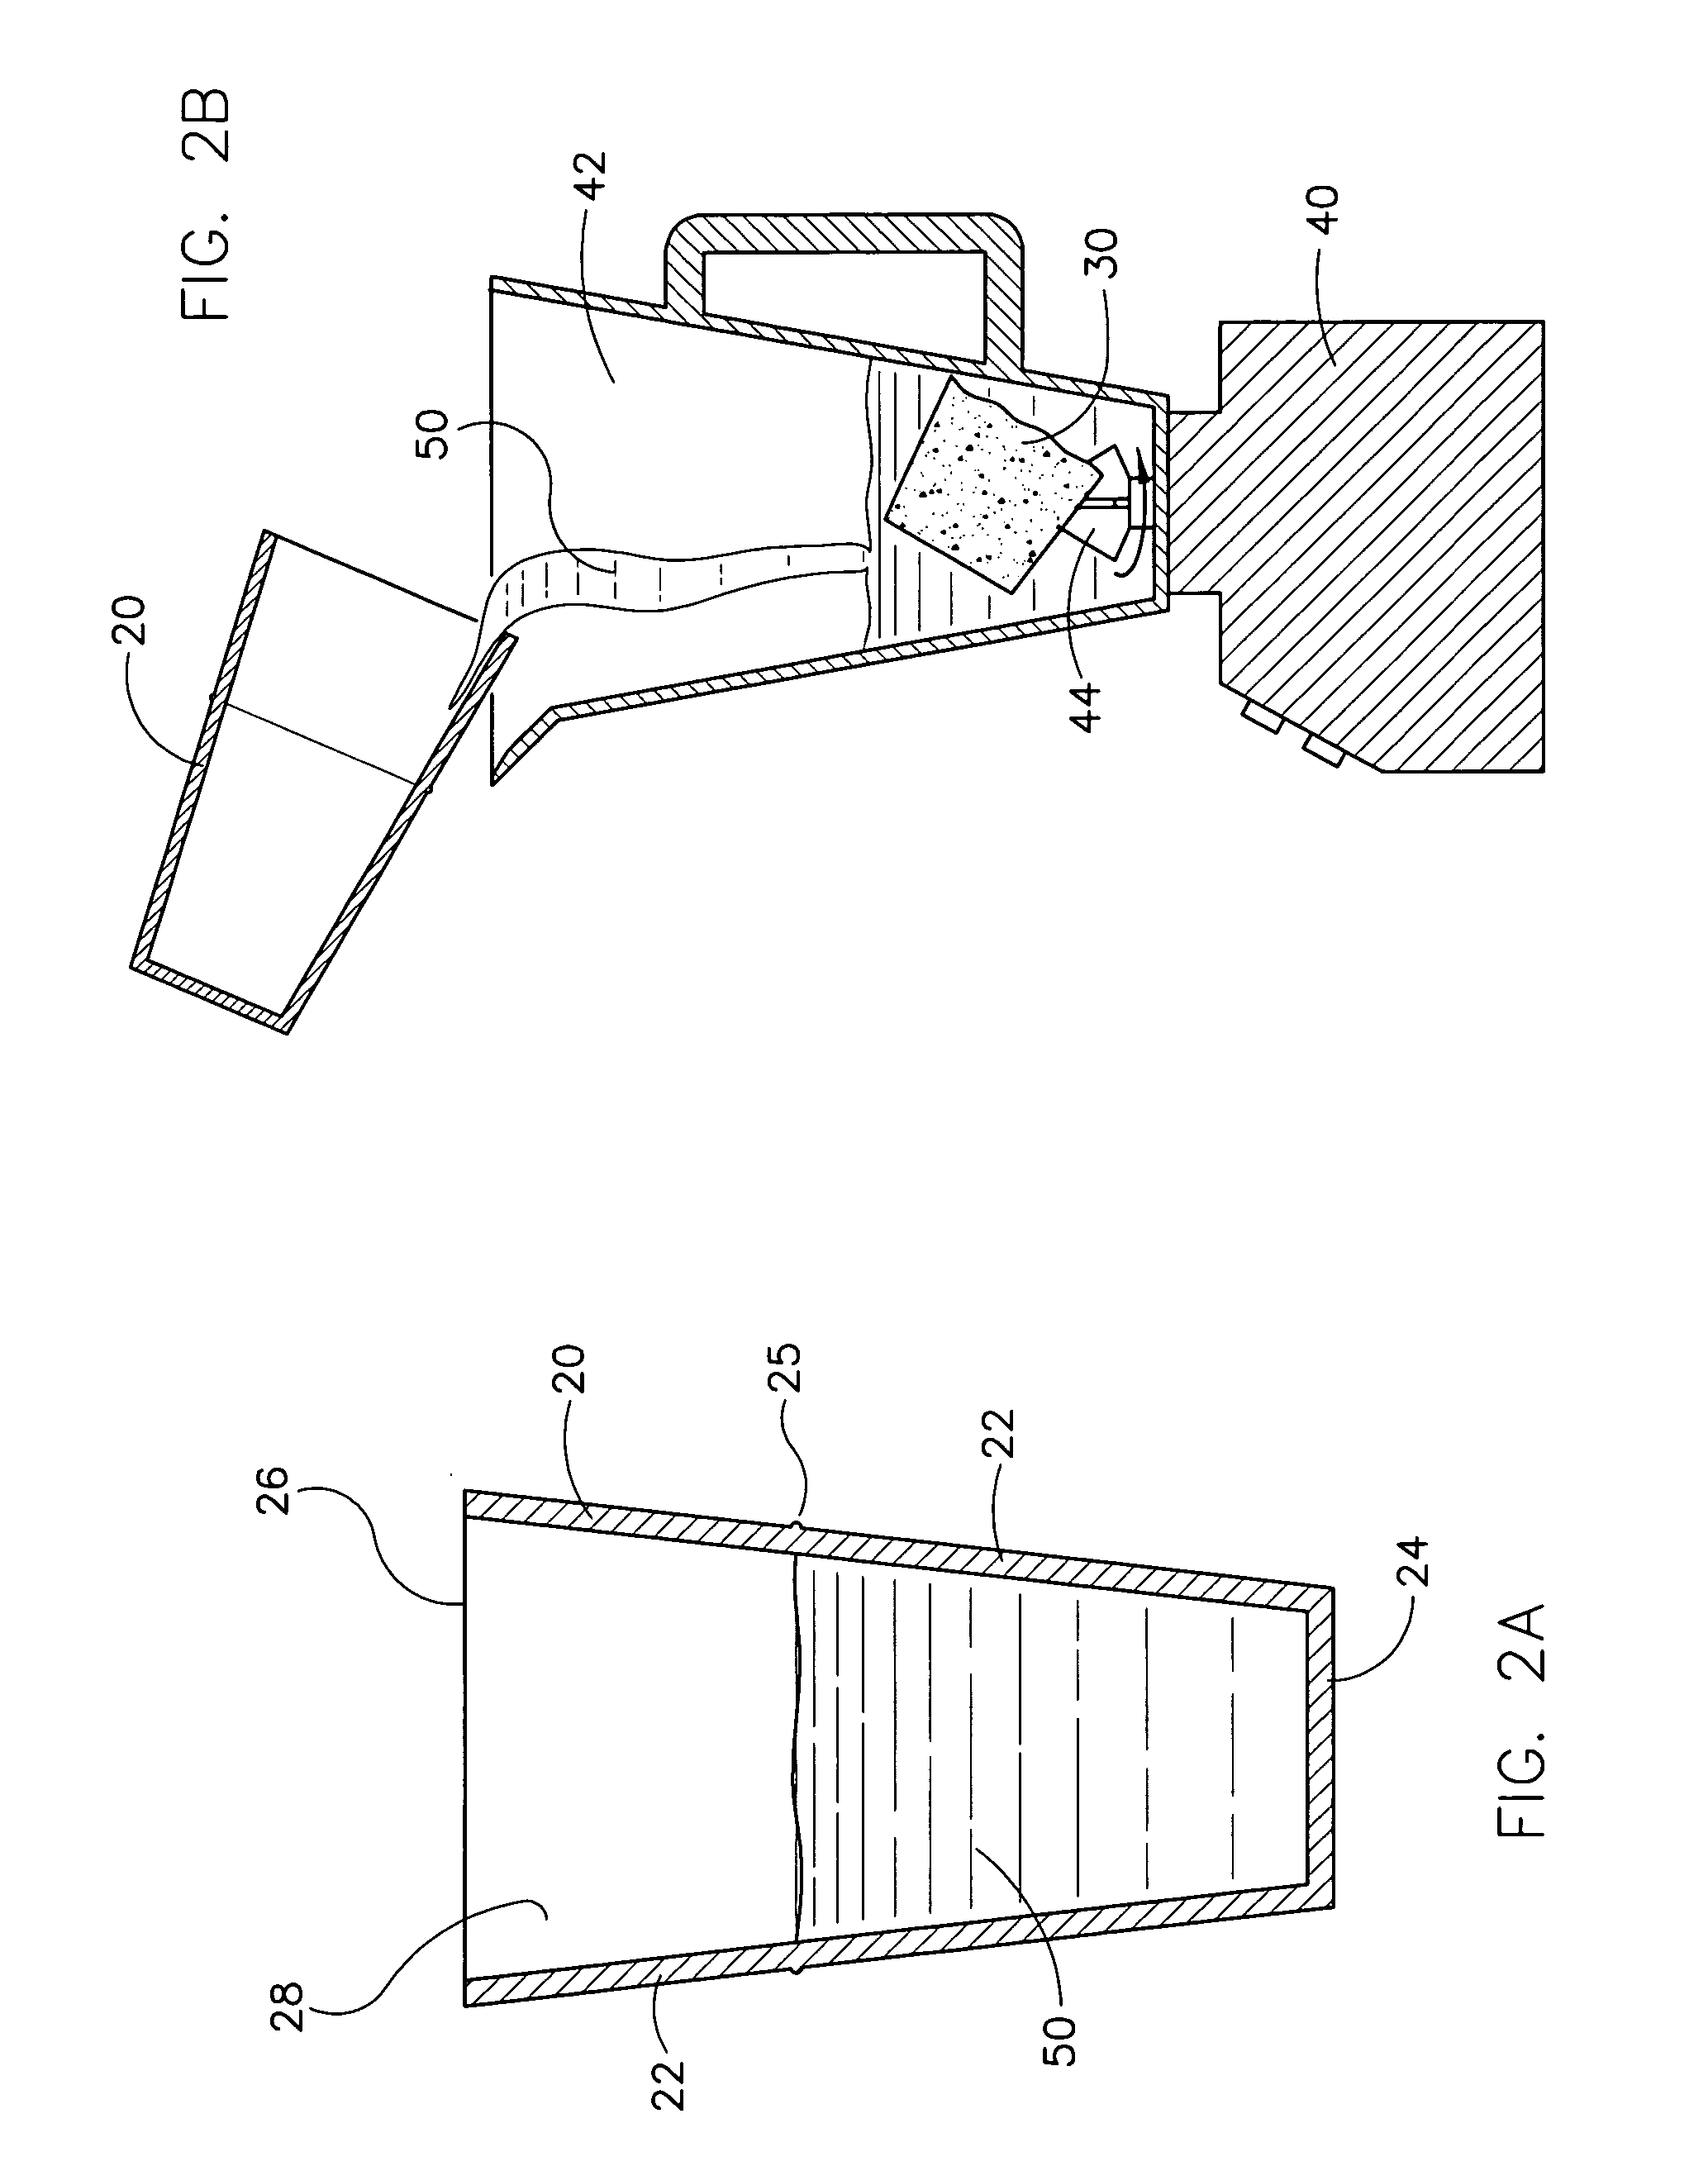 Combined preparation and apparatus for use with a food blender and method for making preparation